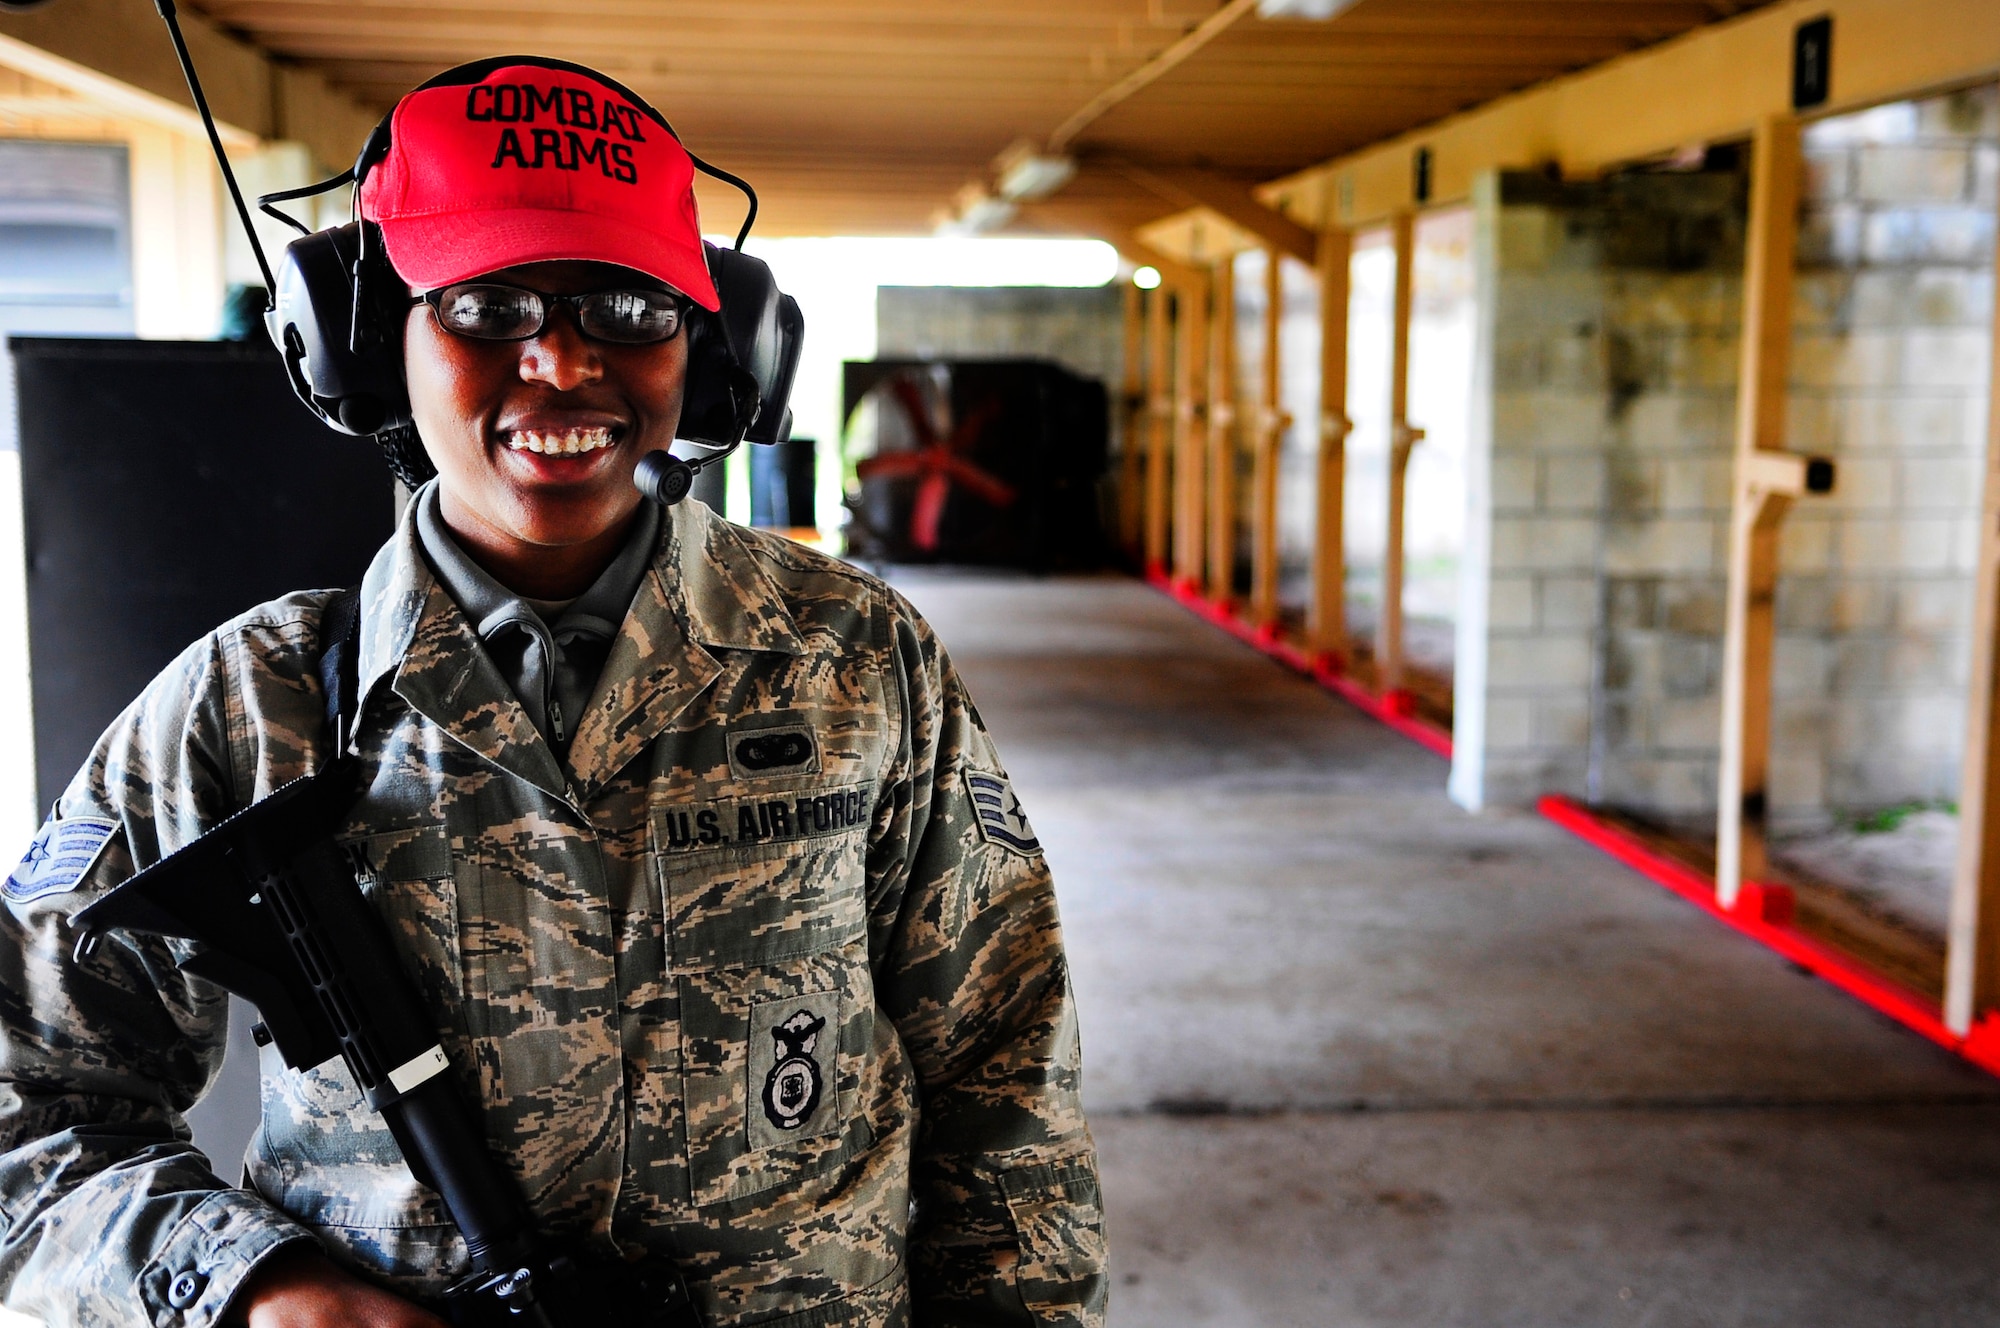 Staff Sgt. Demenica Vick, 6th Security Forces Squadron combat arms training and maintenance instructor, poses for a photo at MacDill Air Force Base, Fla., Nov. 18, 2014. Vick is responsible for ensuring service members who go through the CATM course are qualified and confident in their ability to use their assigned weapon when they are deployed. (U.S. Air Force photo by Senior Airman Jenay Randolph/Released)  